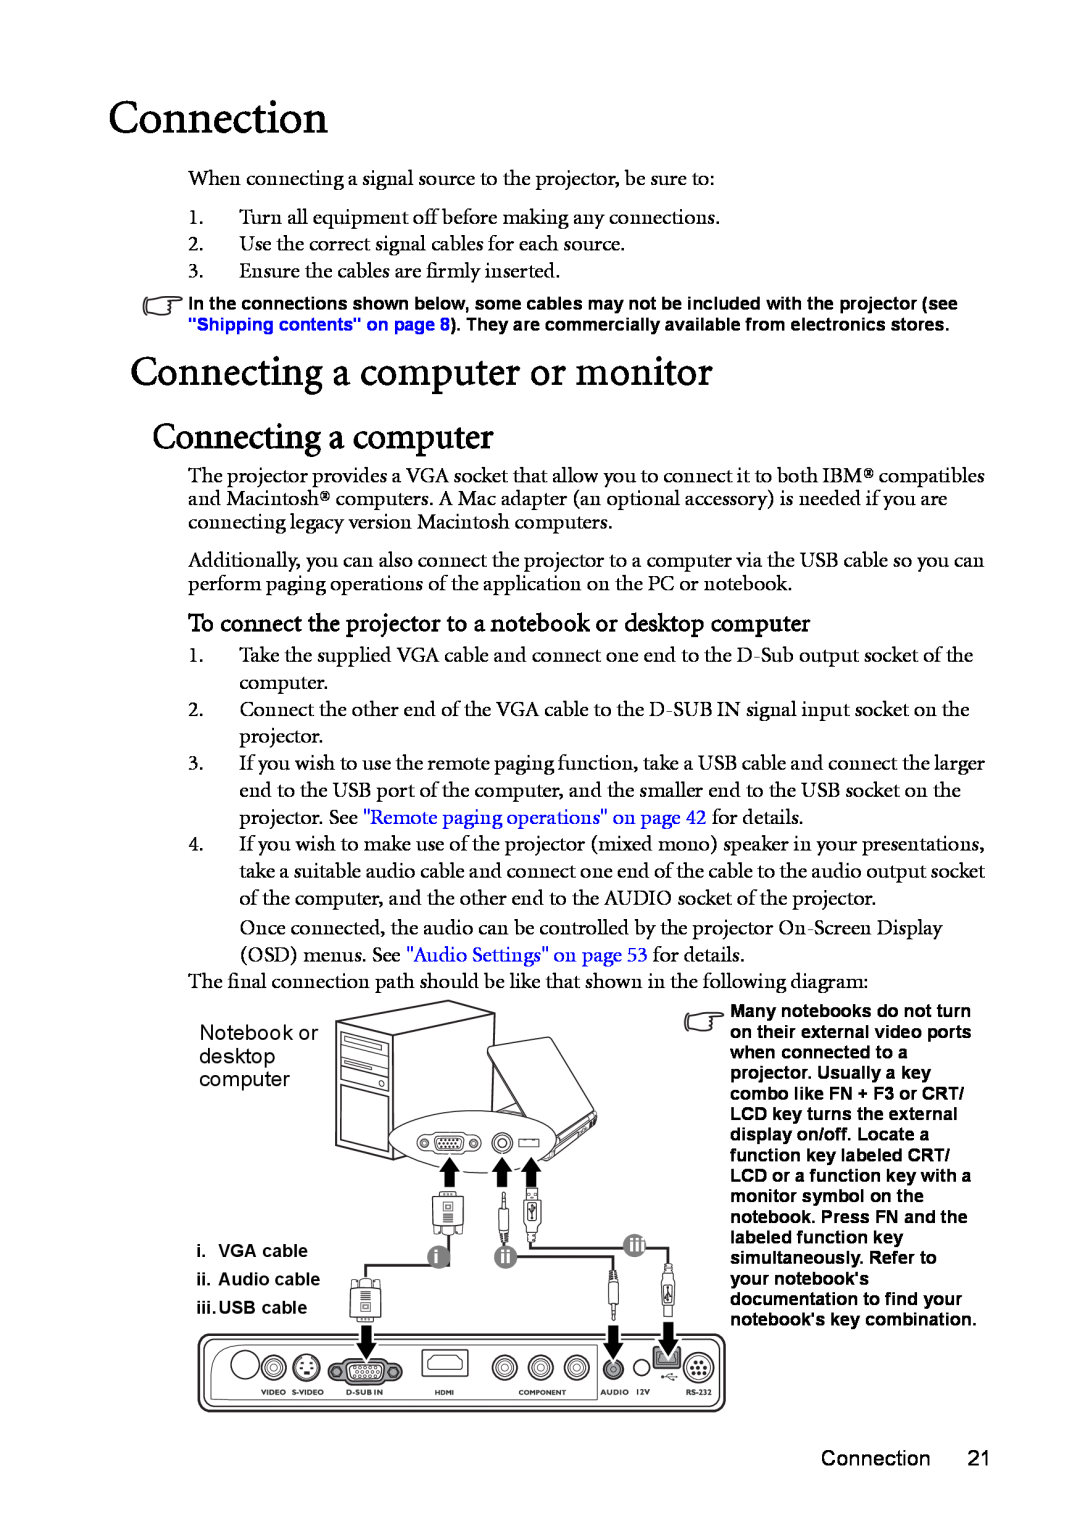 BenQ MP730 manual Connection, Connecting a computer or monitor 